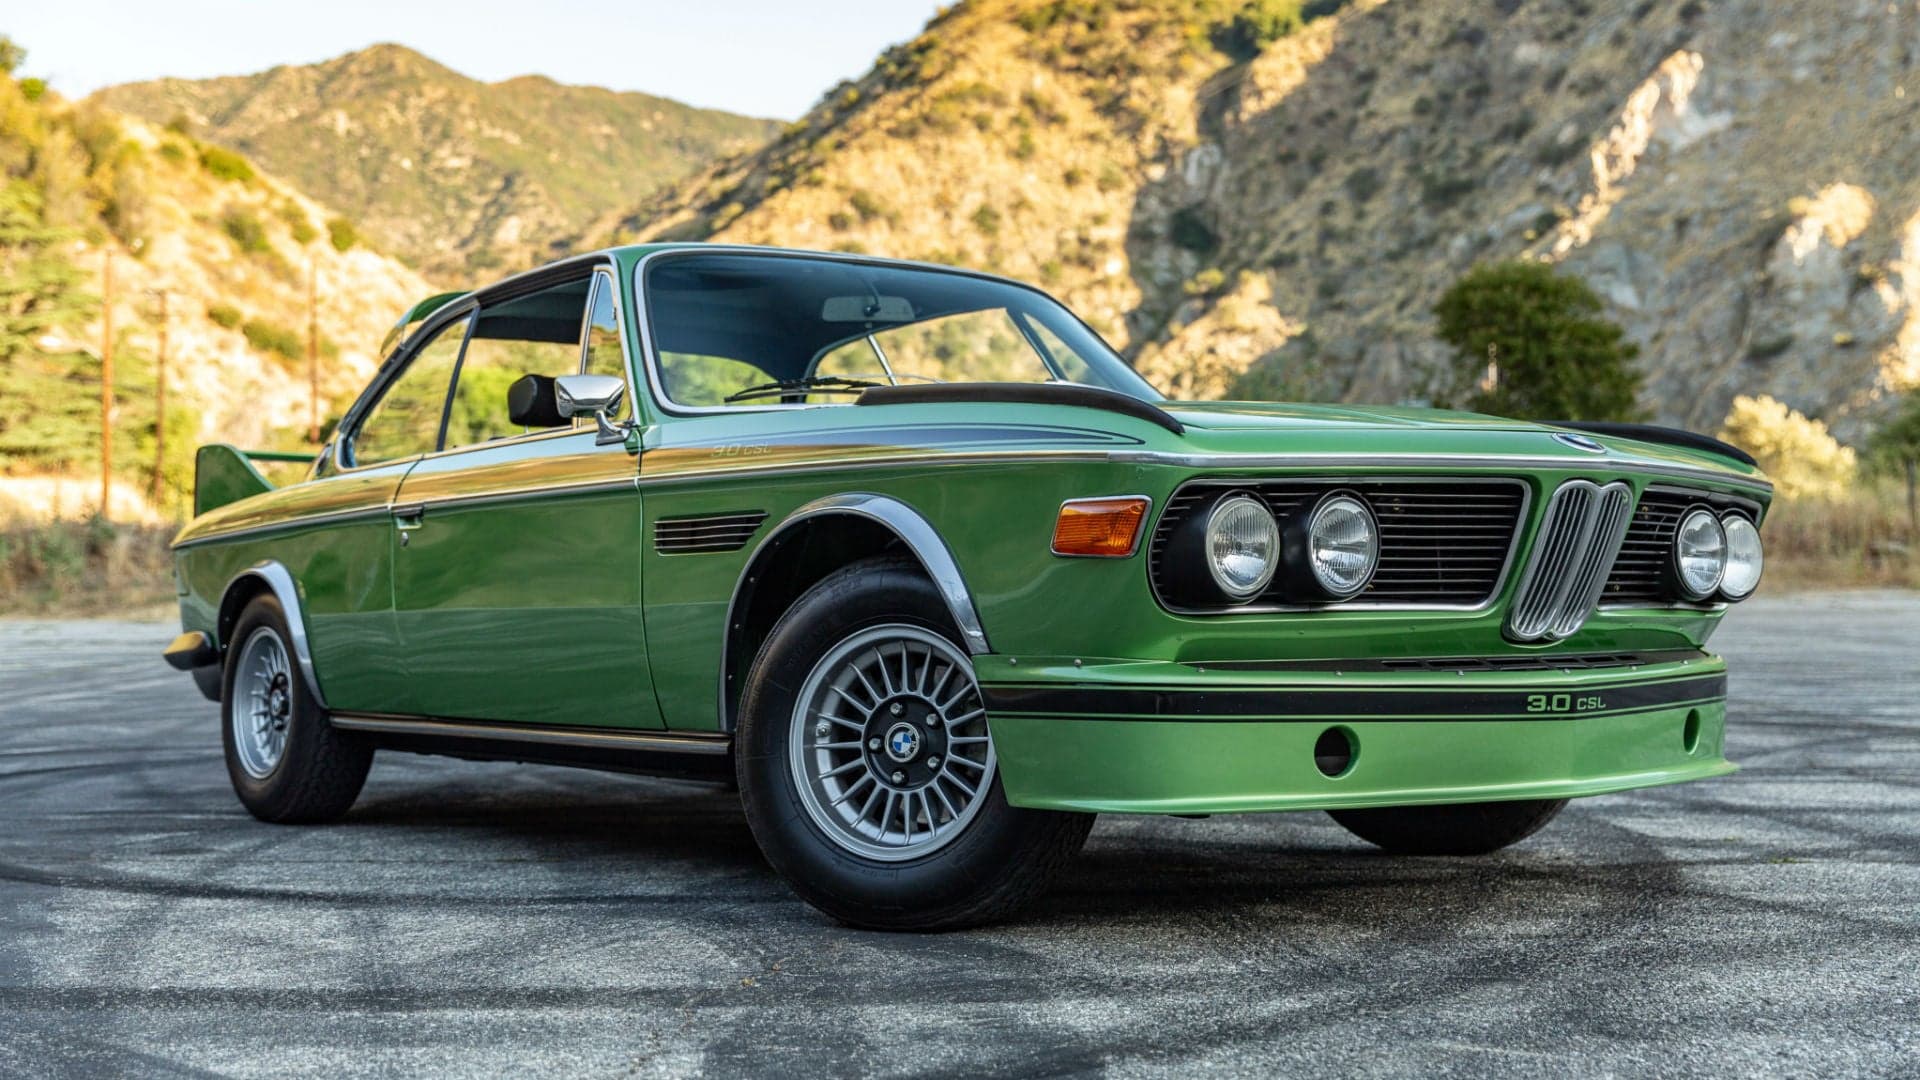 Found for Auction: 1974 BMW 3.0 CSL in Rare Taiga Metallic Green Is 1-of-4 Ever Made